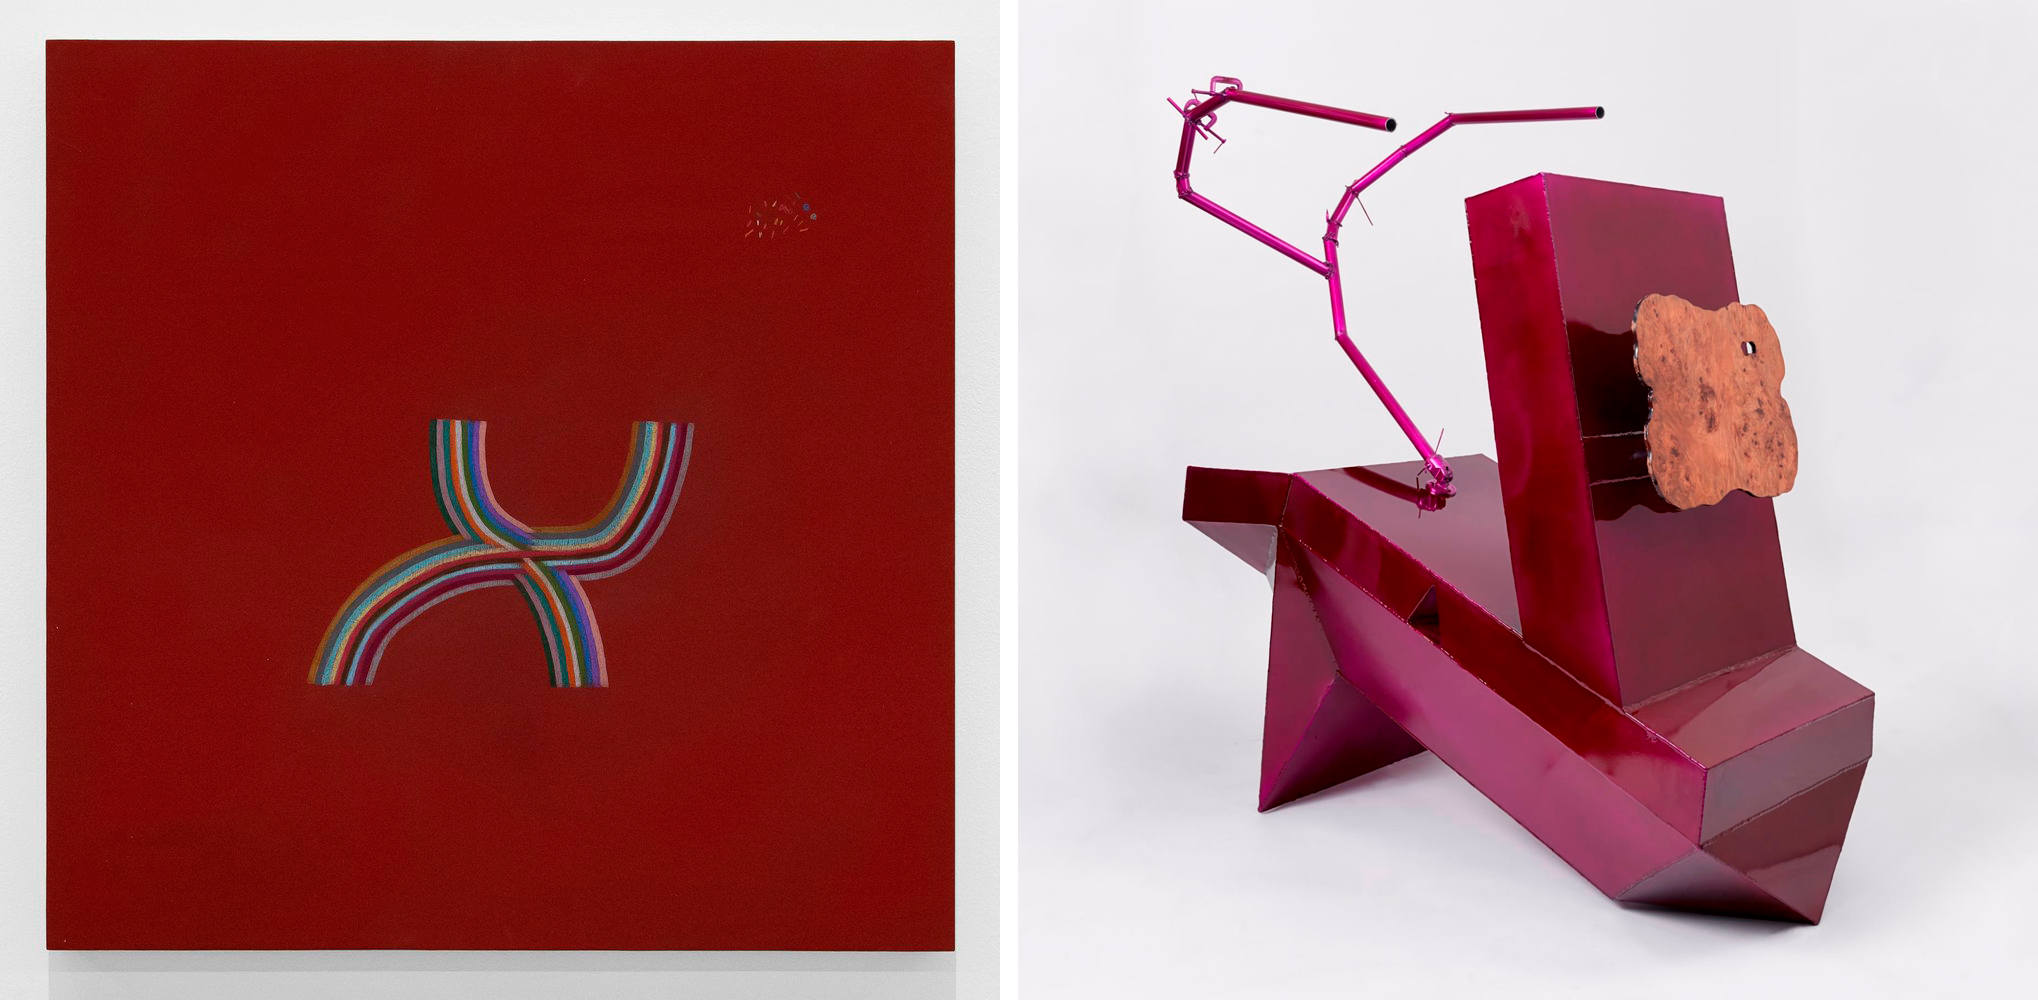 Composite of two artworks, one a deep red drawing on panel of two overlapping rainbows, the other a red metallic abstract sculpture